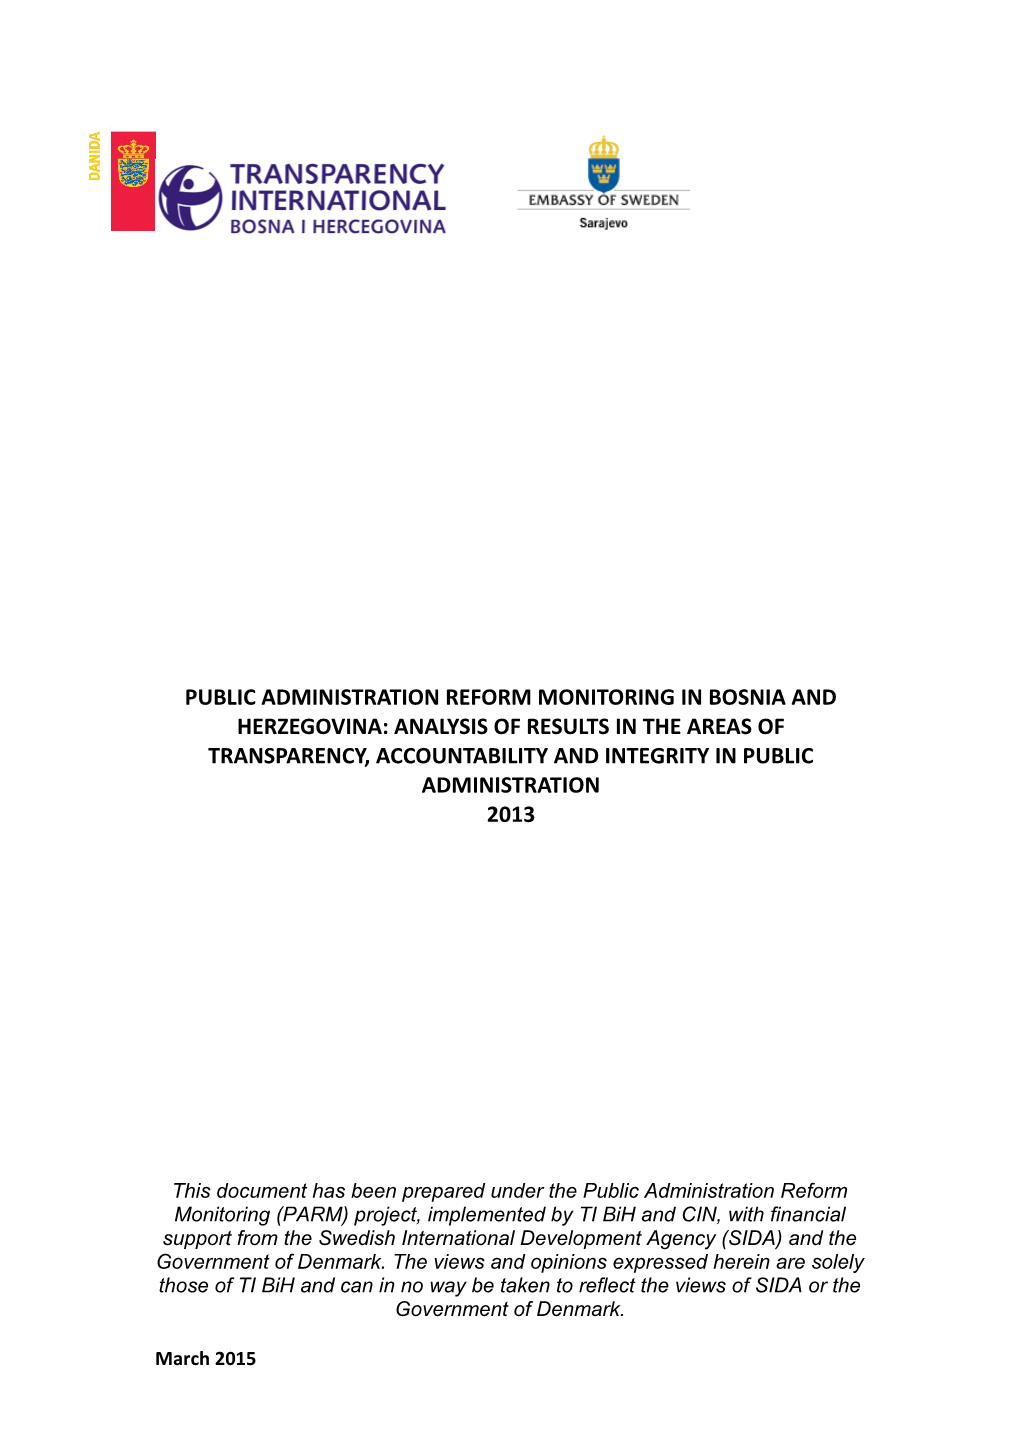 Public Administration Reform Monitoring in Bosnia and Herzegovina: Analysis of Results